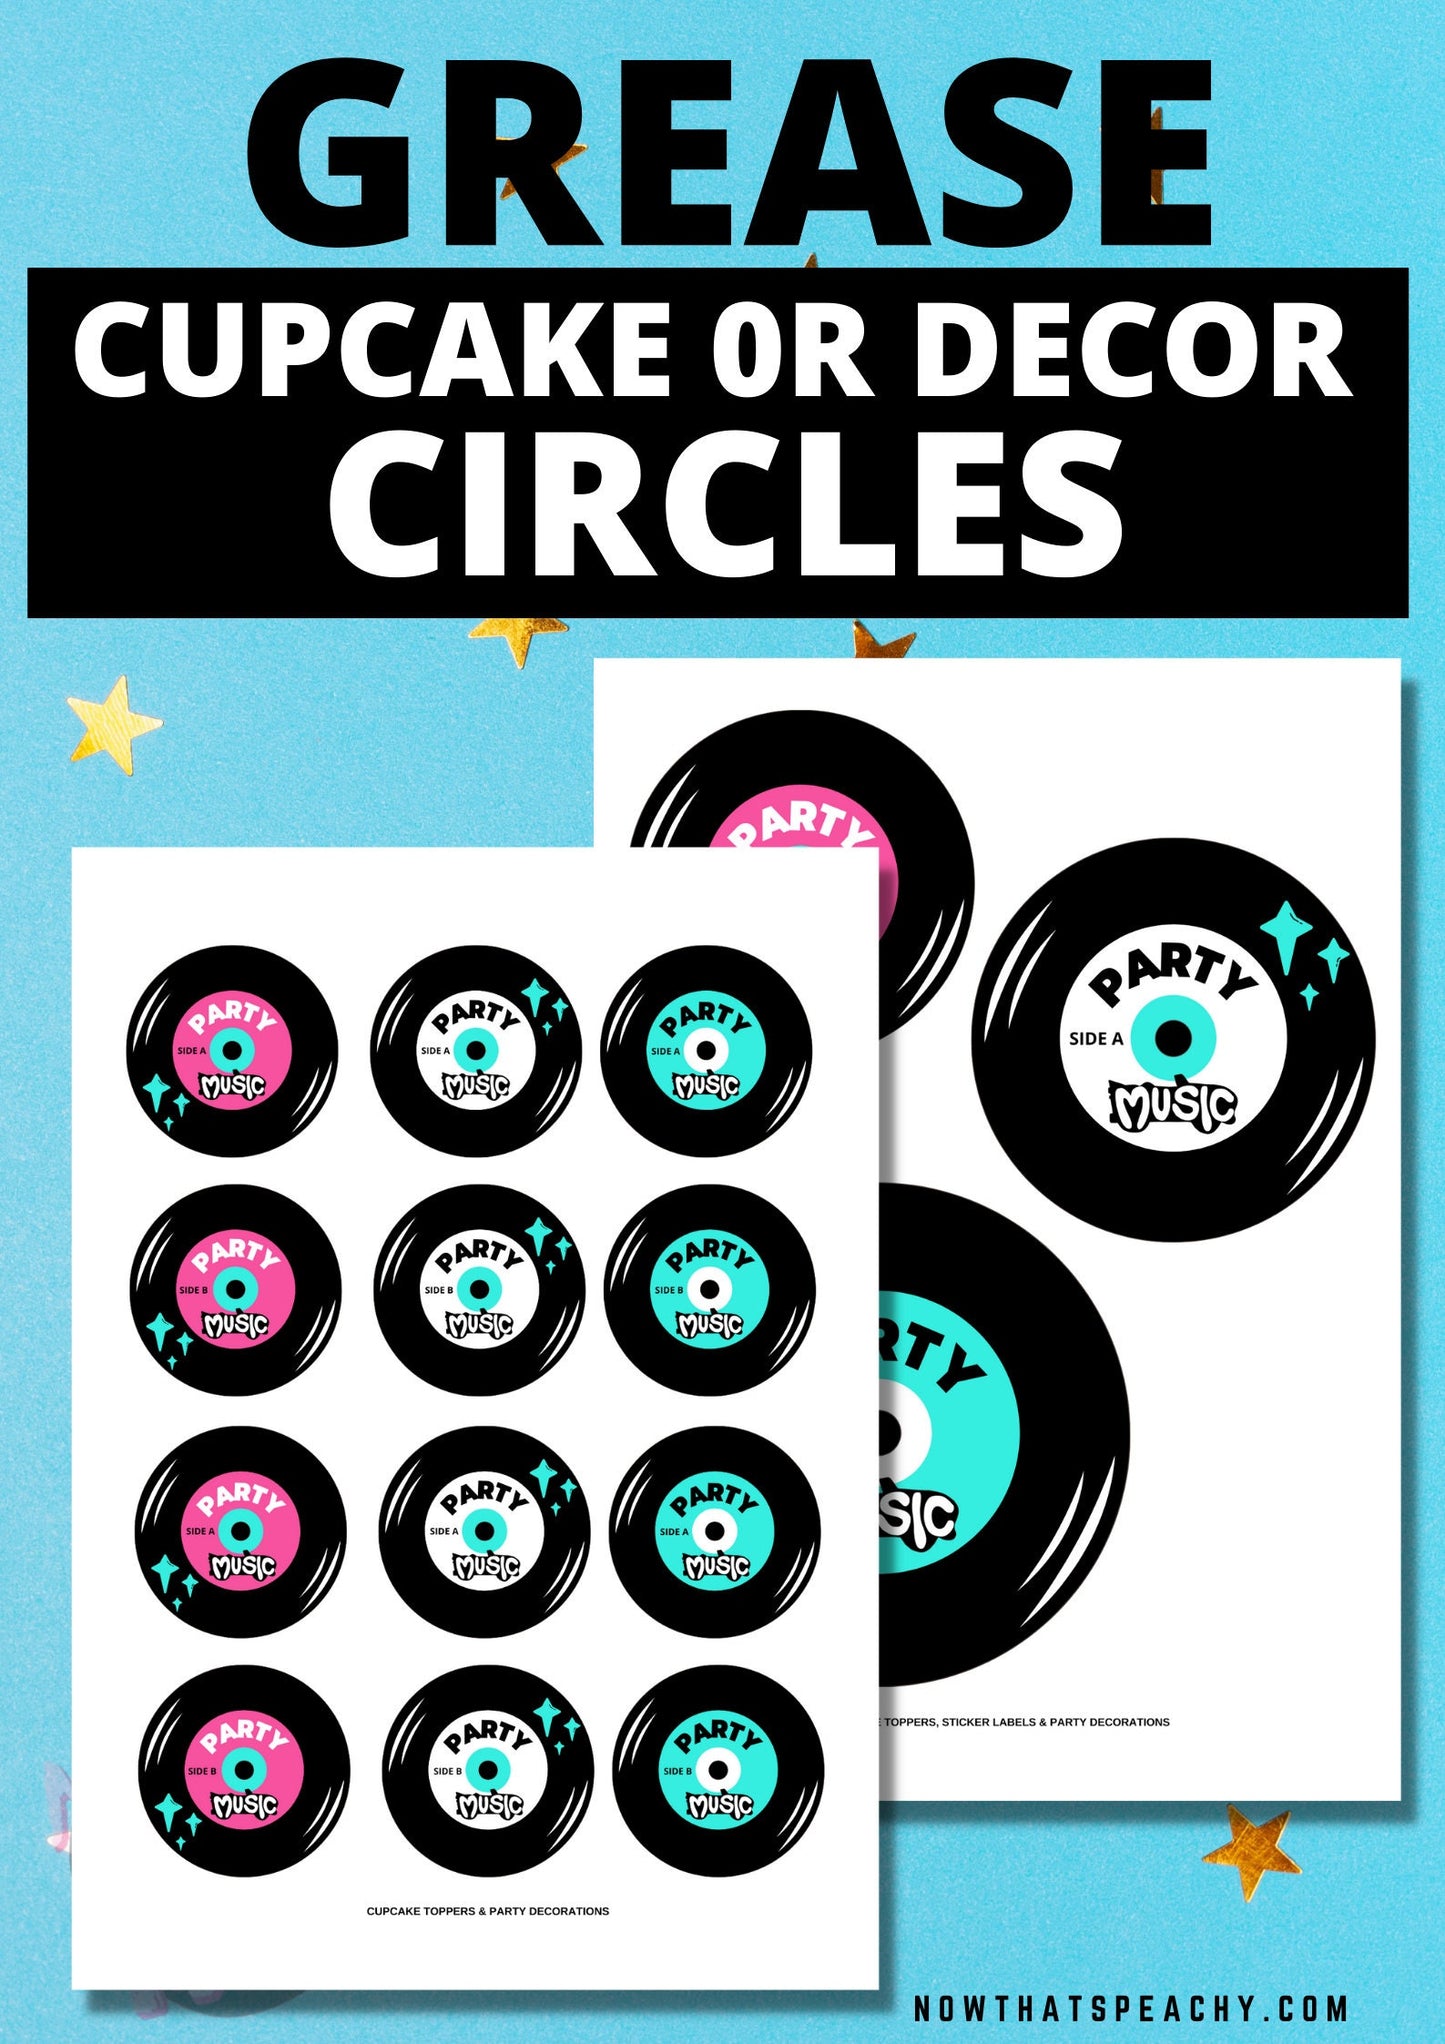 Grease Movie party vinyl record cupcake cake toppers circle sticker template decorations 1950s fifties 50's printable template digital instant download edit Danny Sandy T-birds Pink Ladies  invite soda hop jukebox rockabilly rock'n'roll musical movie design black white modern color fun themed bachelorette birthday charity fundraiser event activity pack